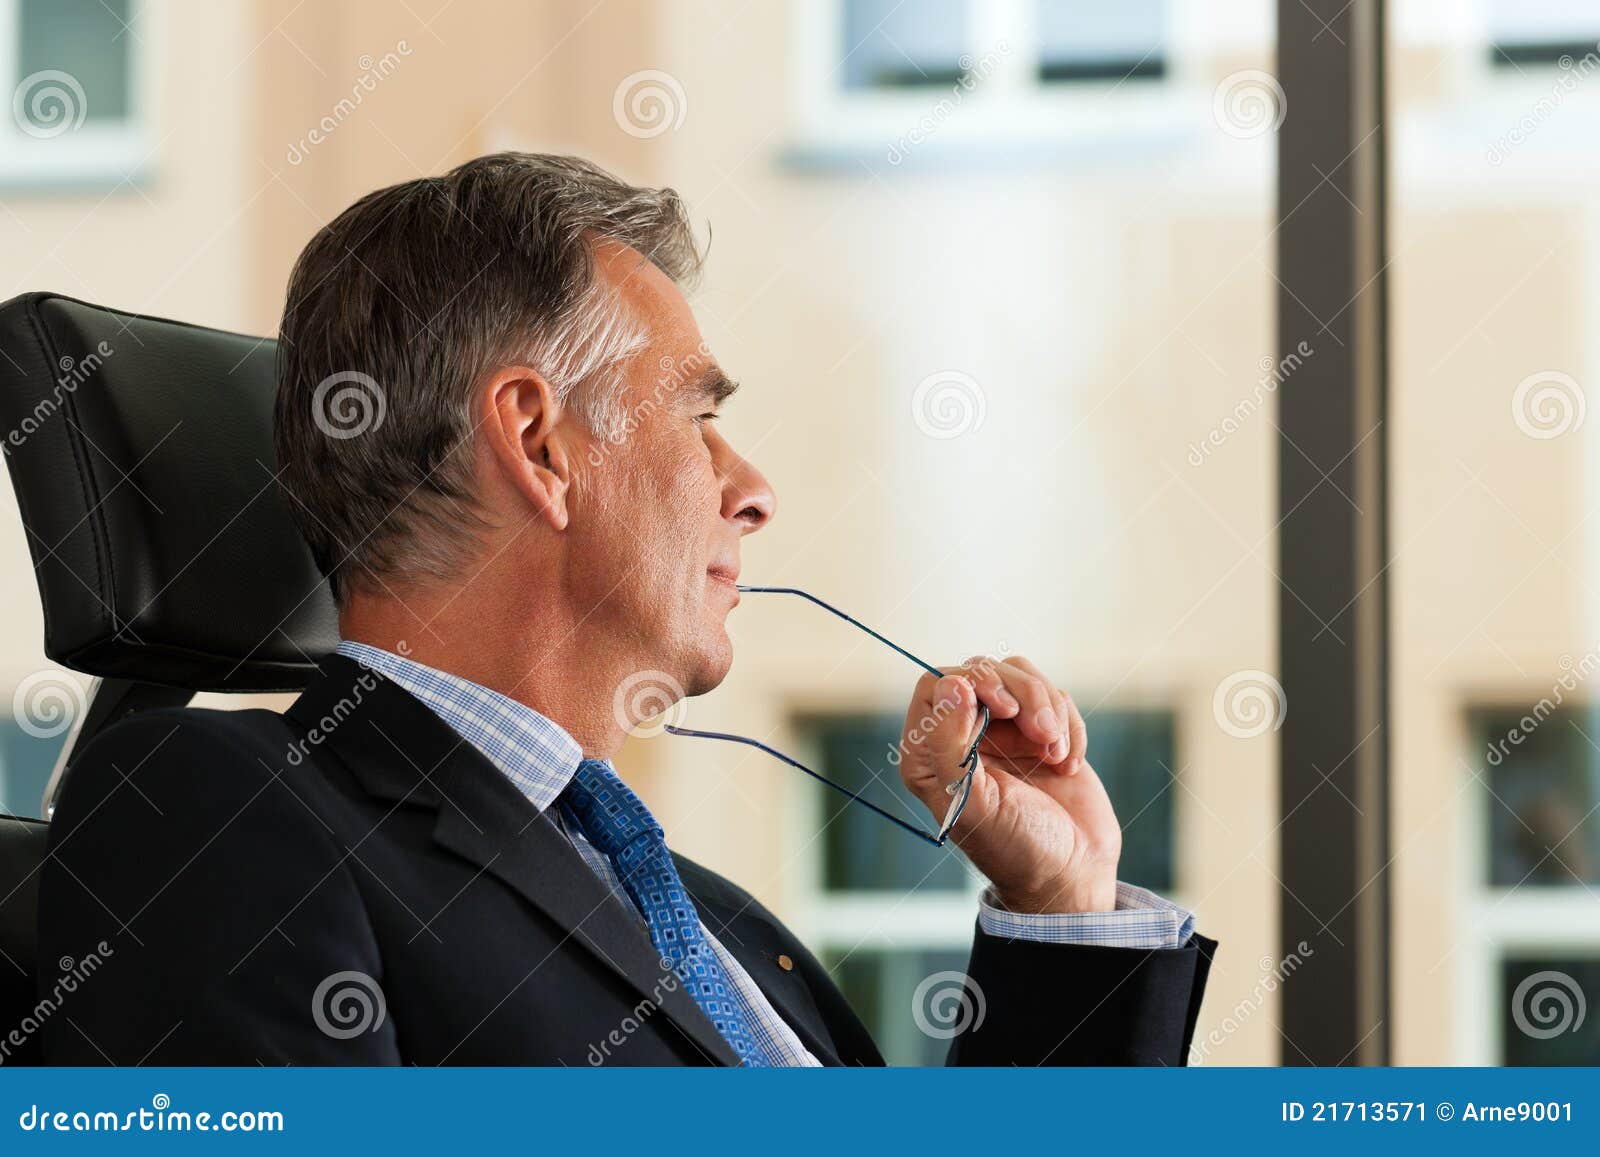 Business - Boss Contemplating In His Office Stock Image - Image: 21713571